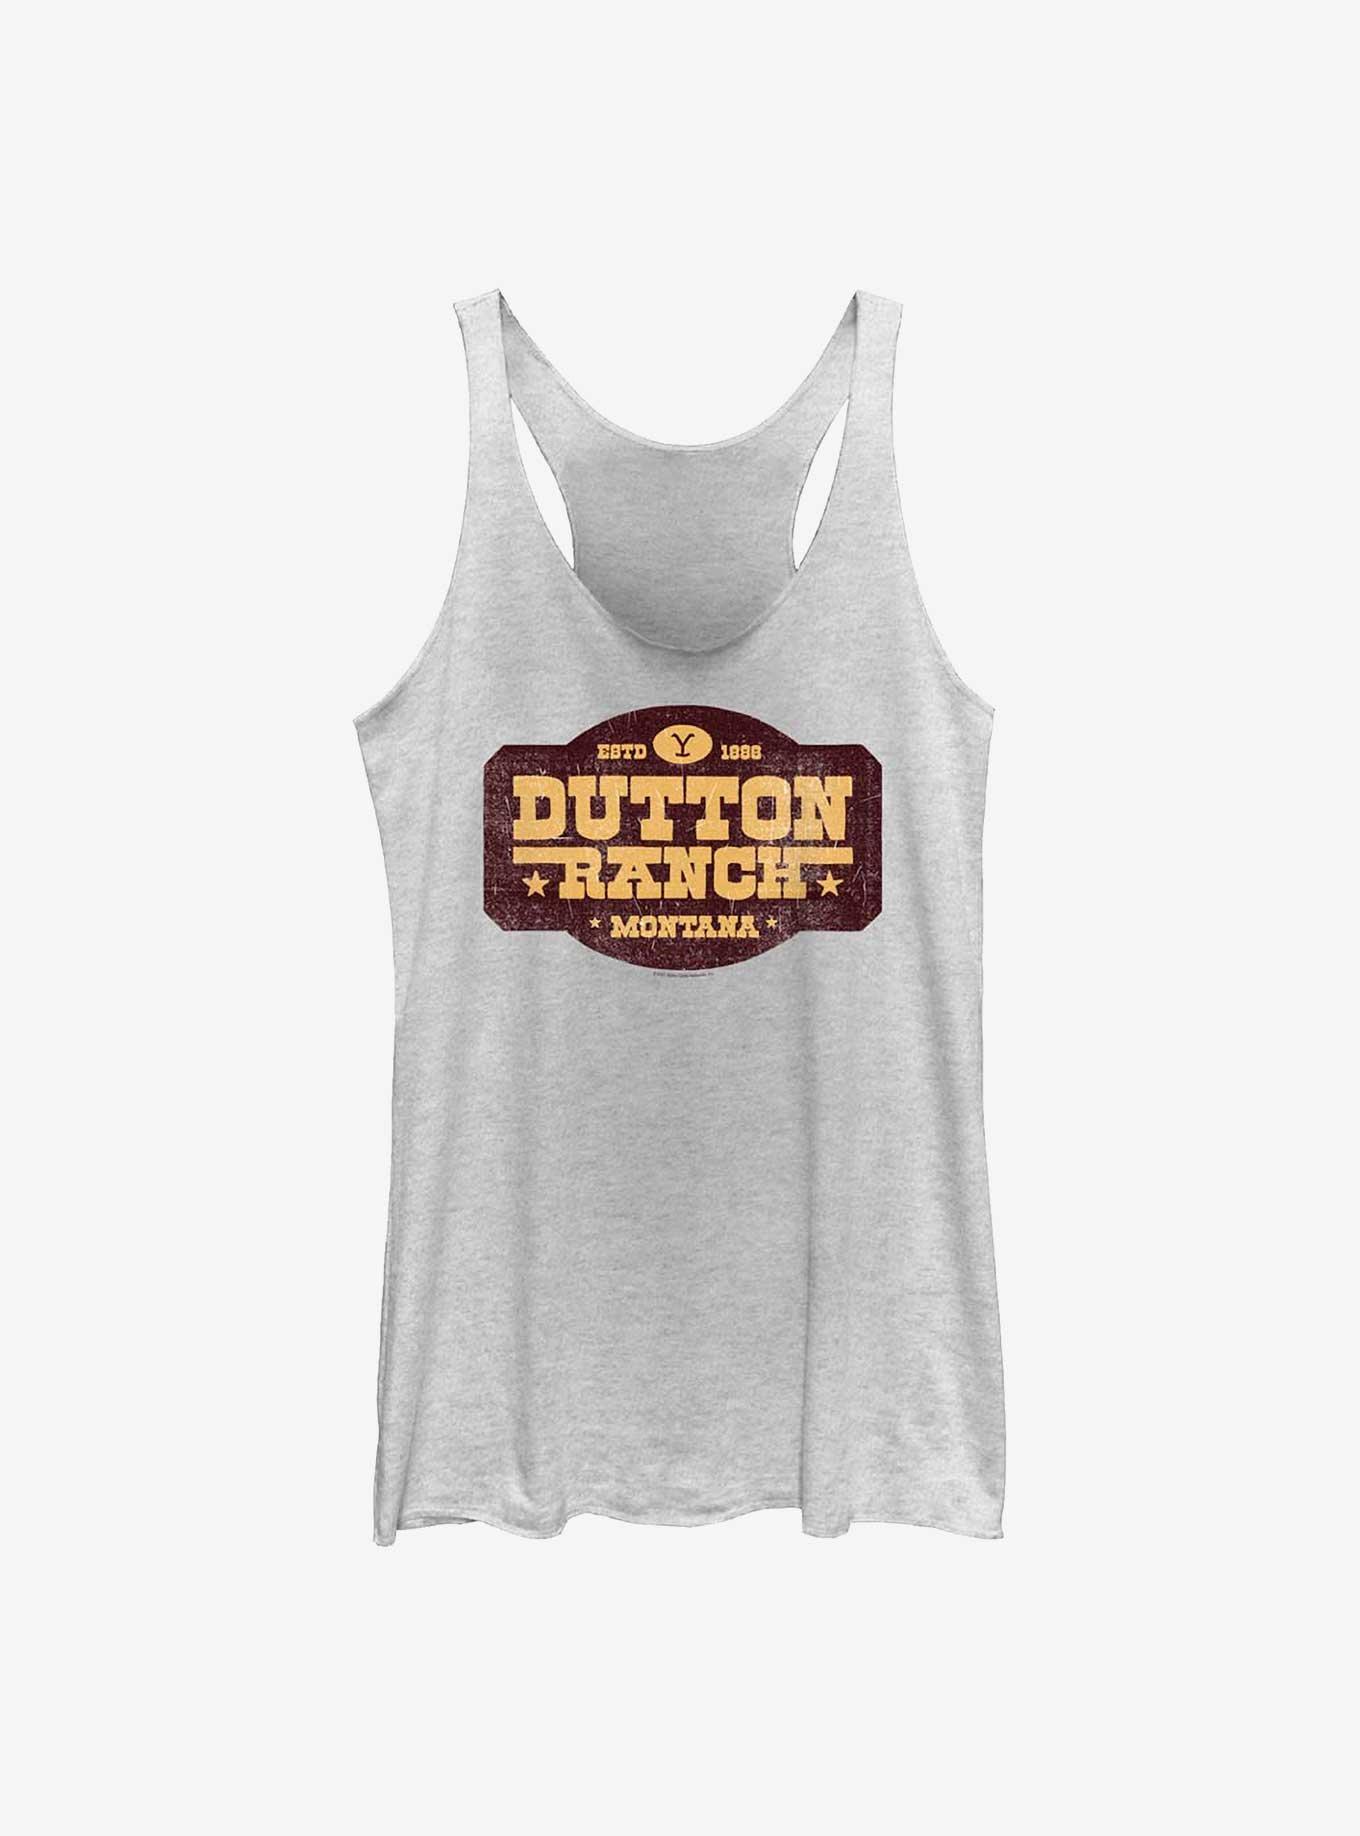 Yellowstone Dutton Ranch Distressed Sign Girls Tank